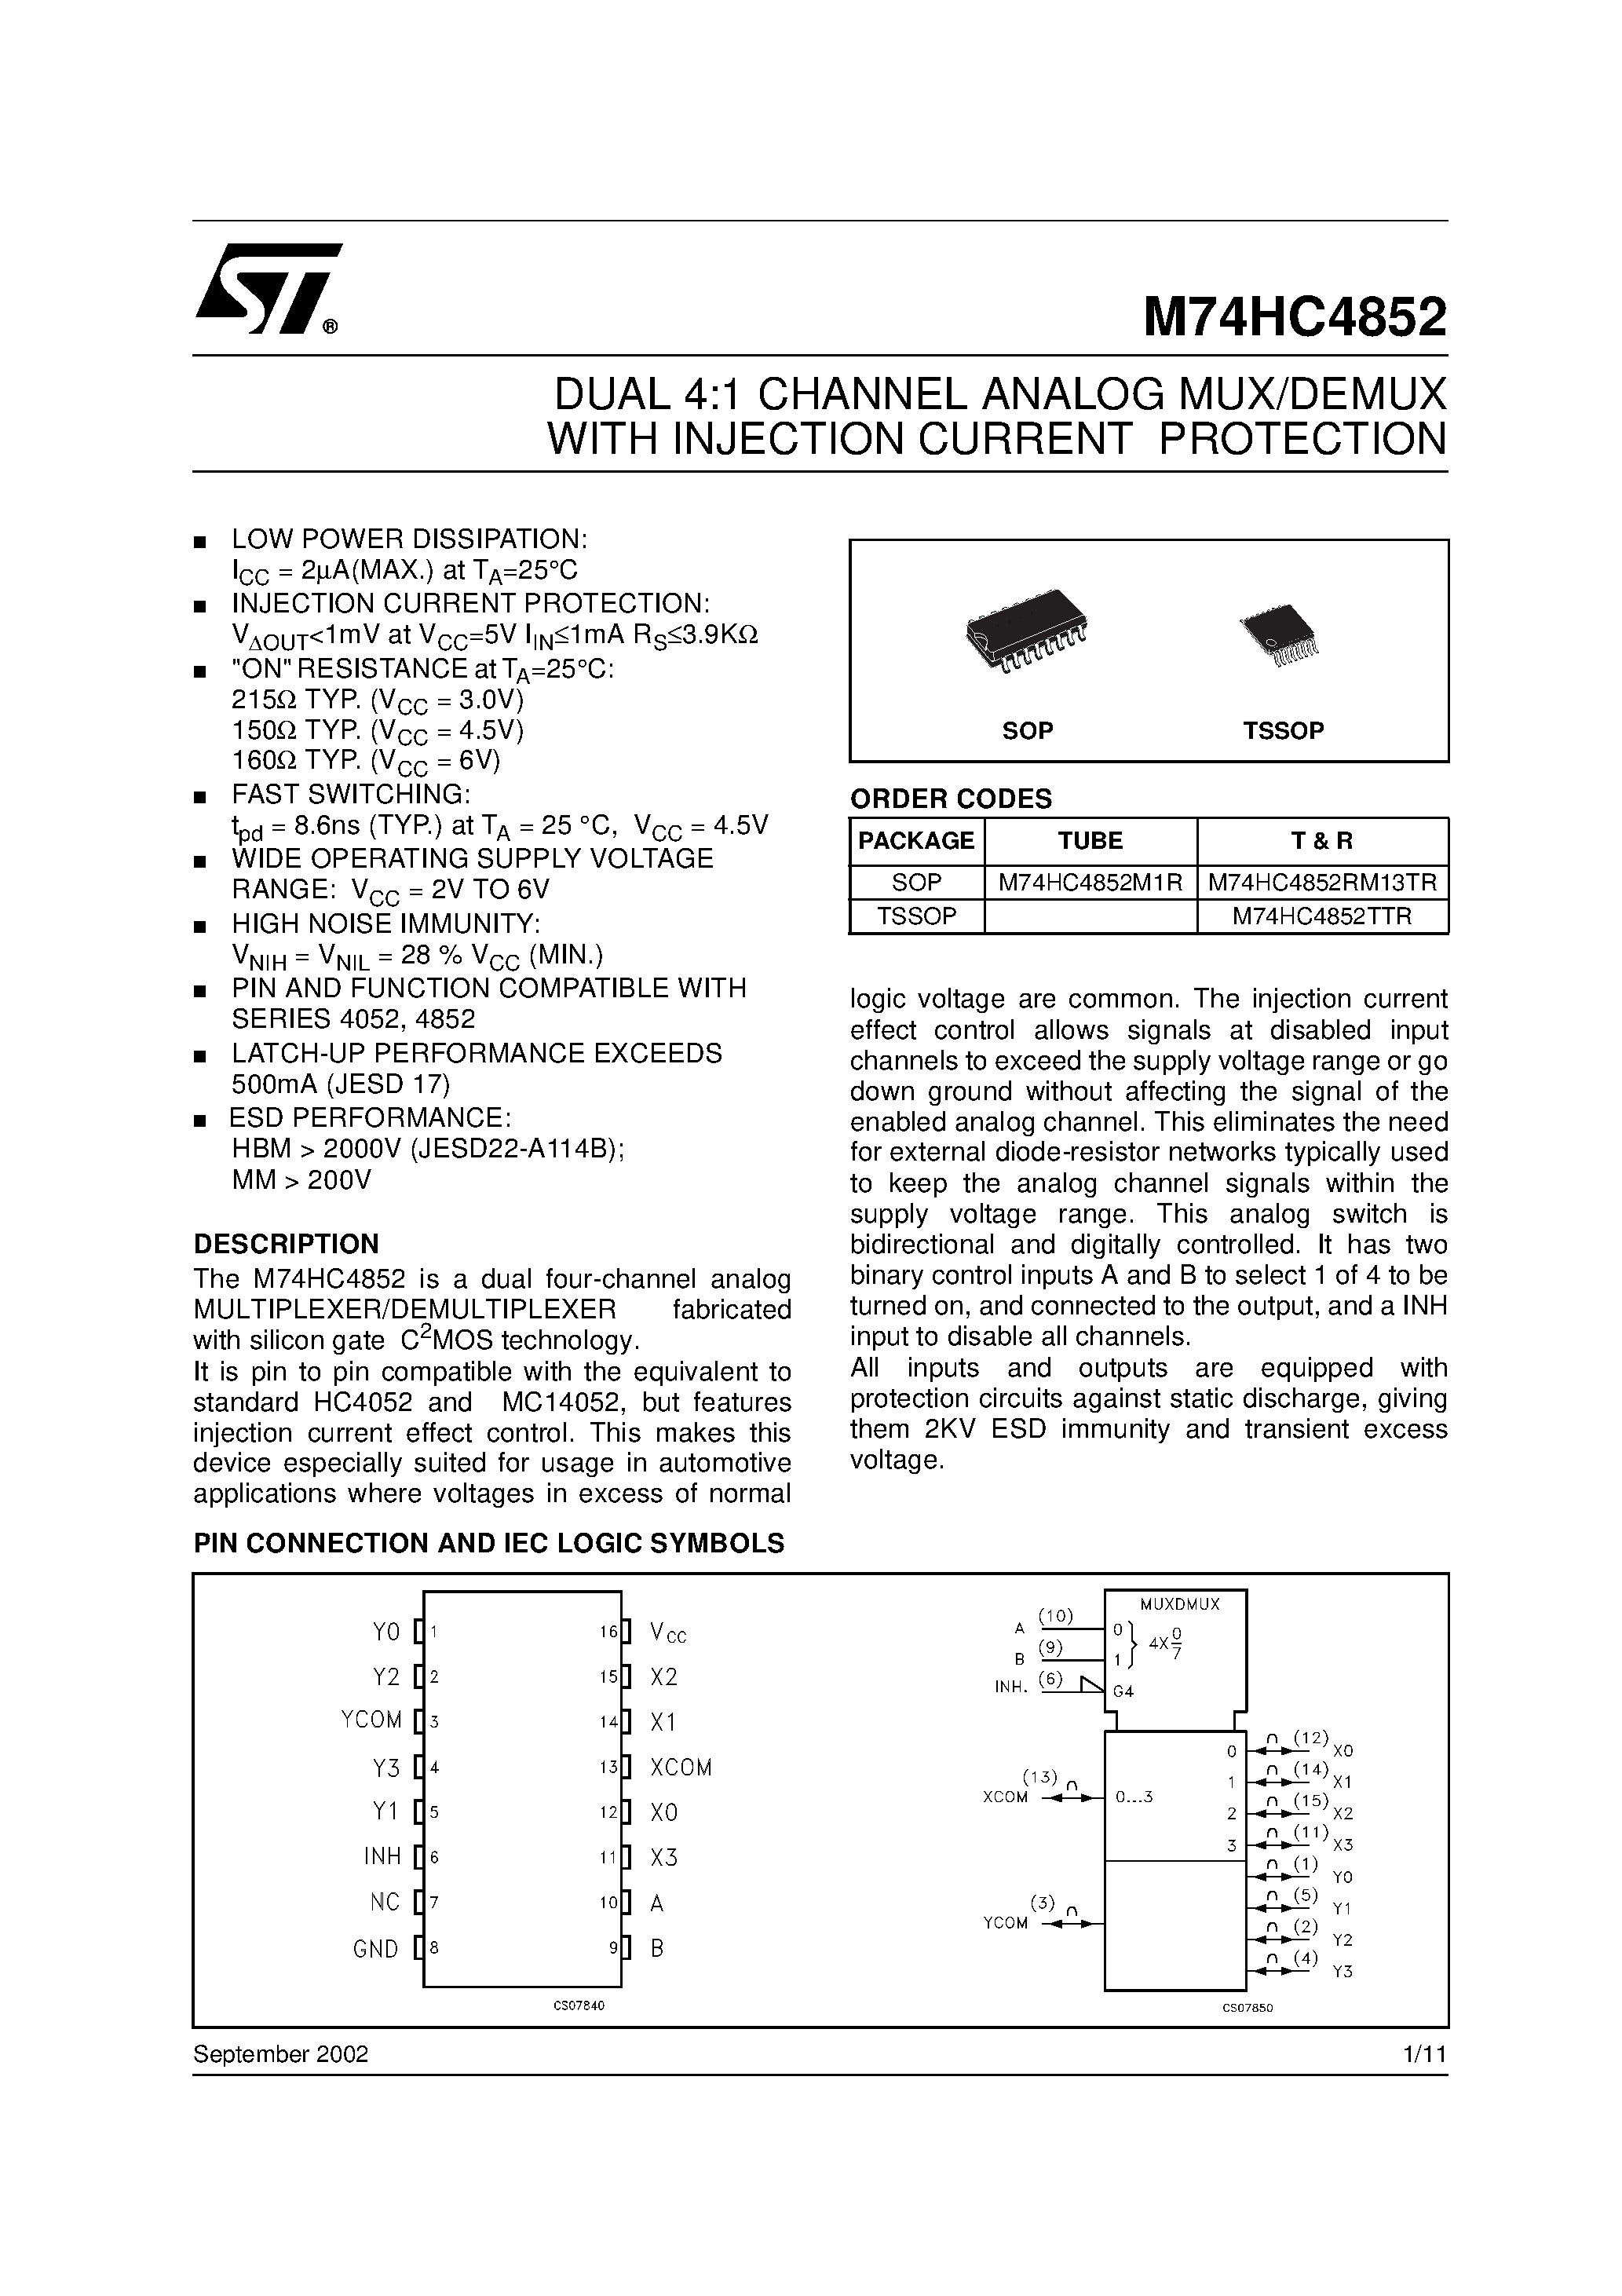 Даташит M74HC4852 - DUAL 4:1 CHANNEL ANALOG MUX/DEMUX WITH INJECTION CURRENT PROTECTION страница 1